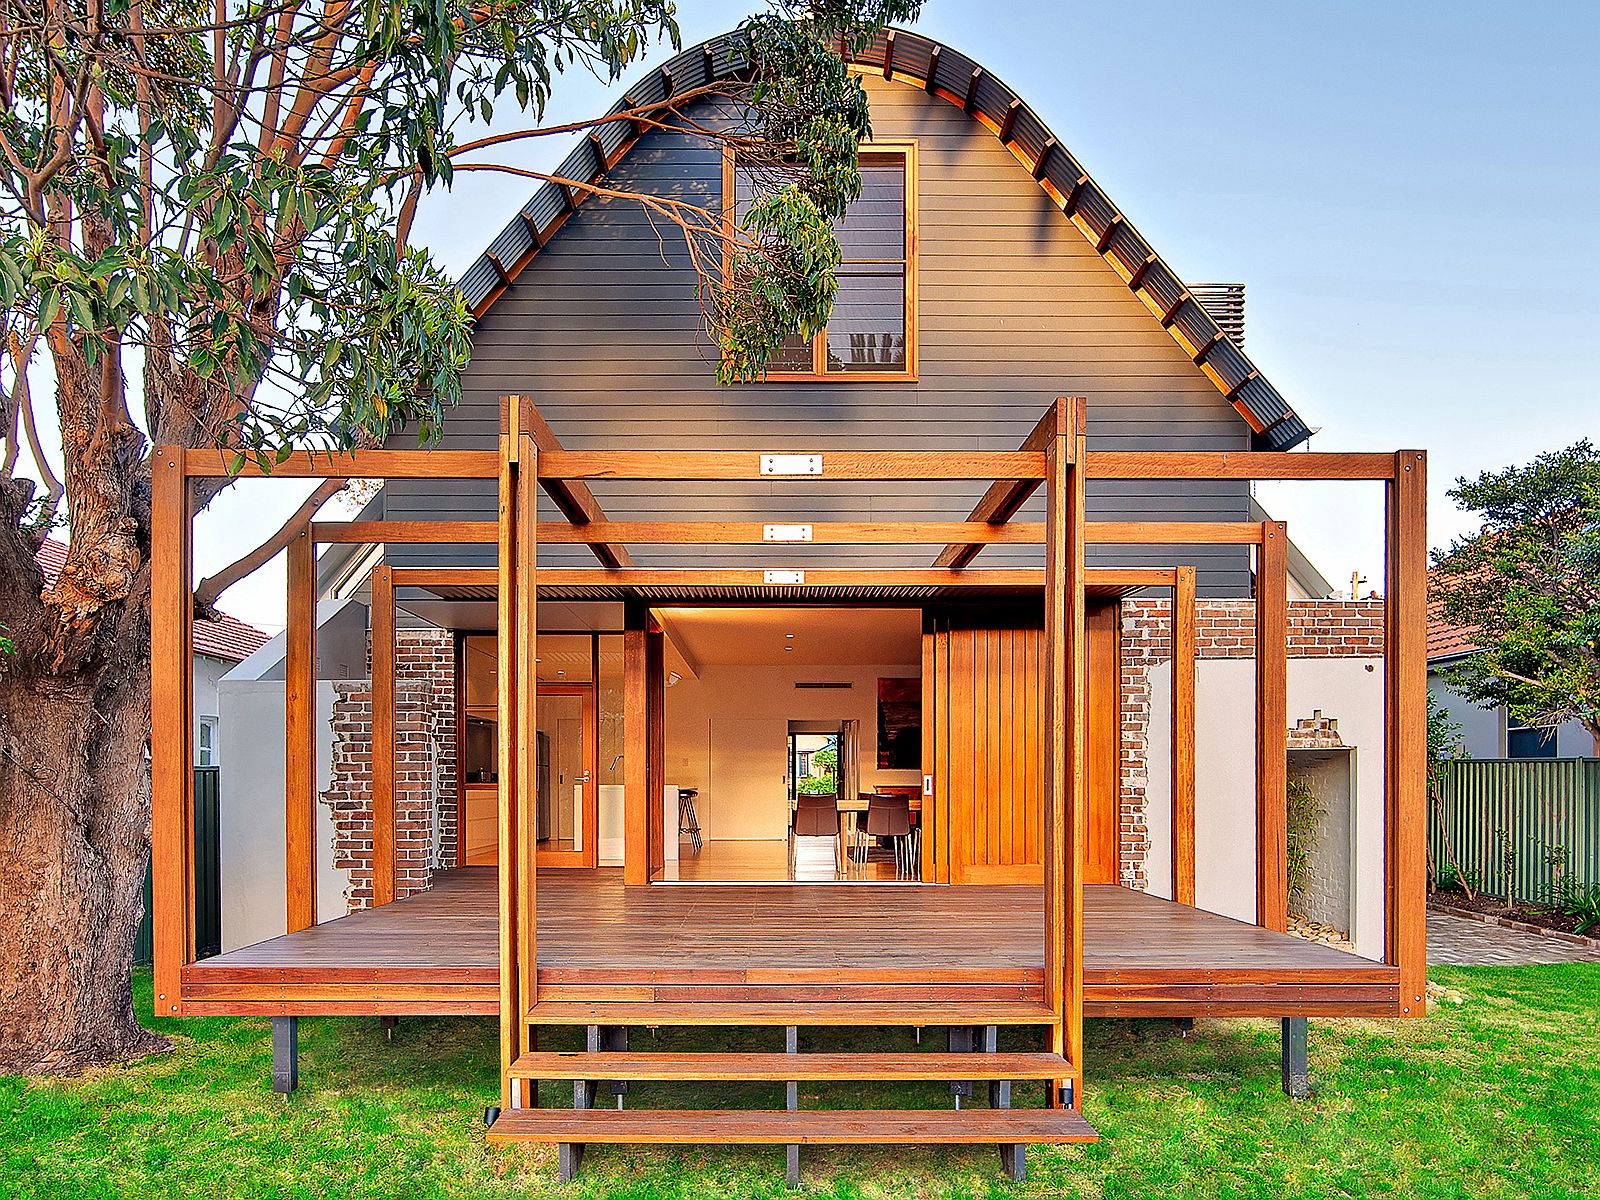 Exended-rear-deck-of-the-house-creates-a-social-zone-that-is-perfect-for-family-time-21349